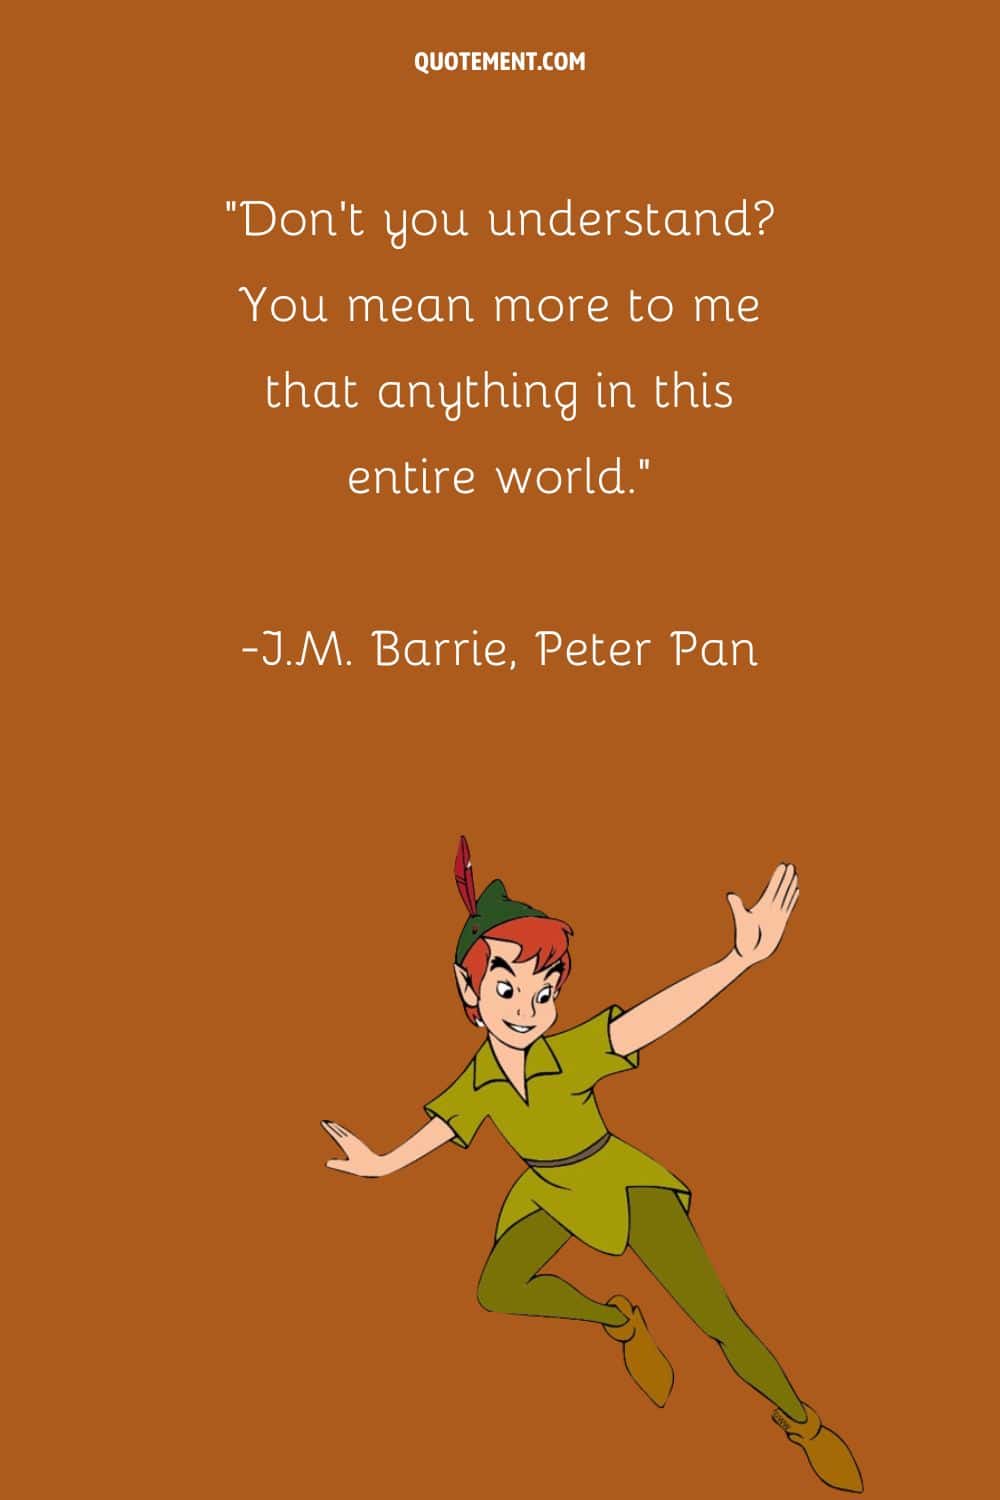 “Don't you understand You mean more to me that anything in this entire world.” ― J.M. Barrie, Peter Pan